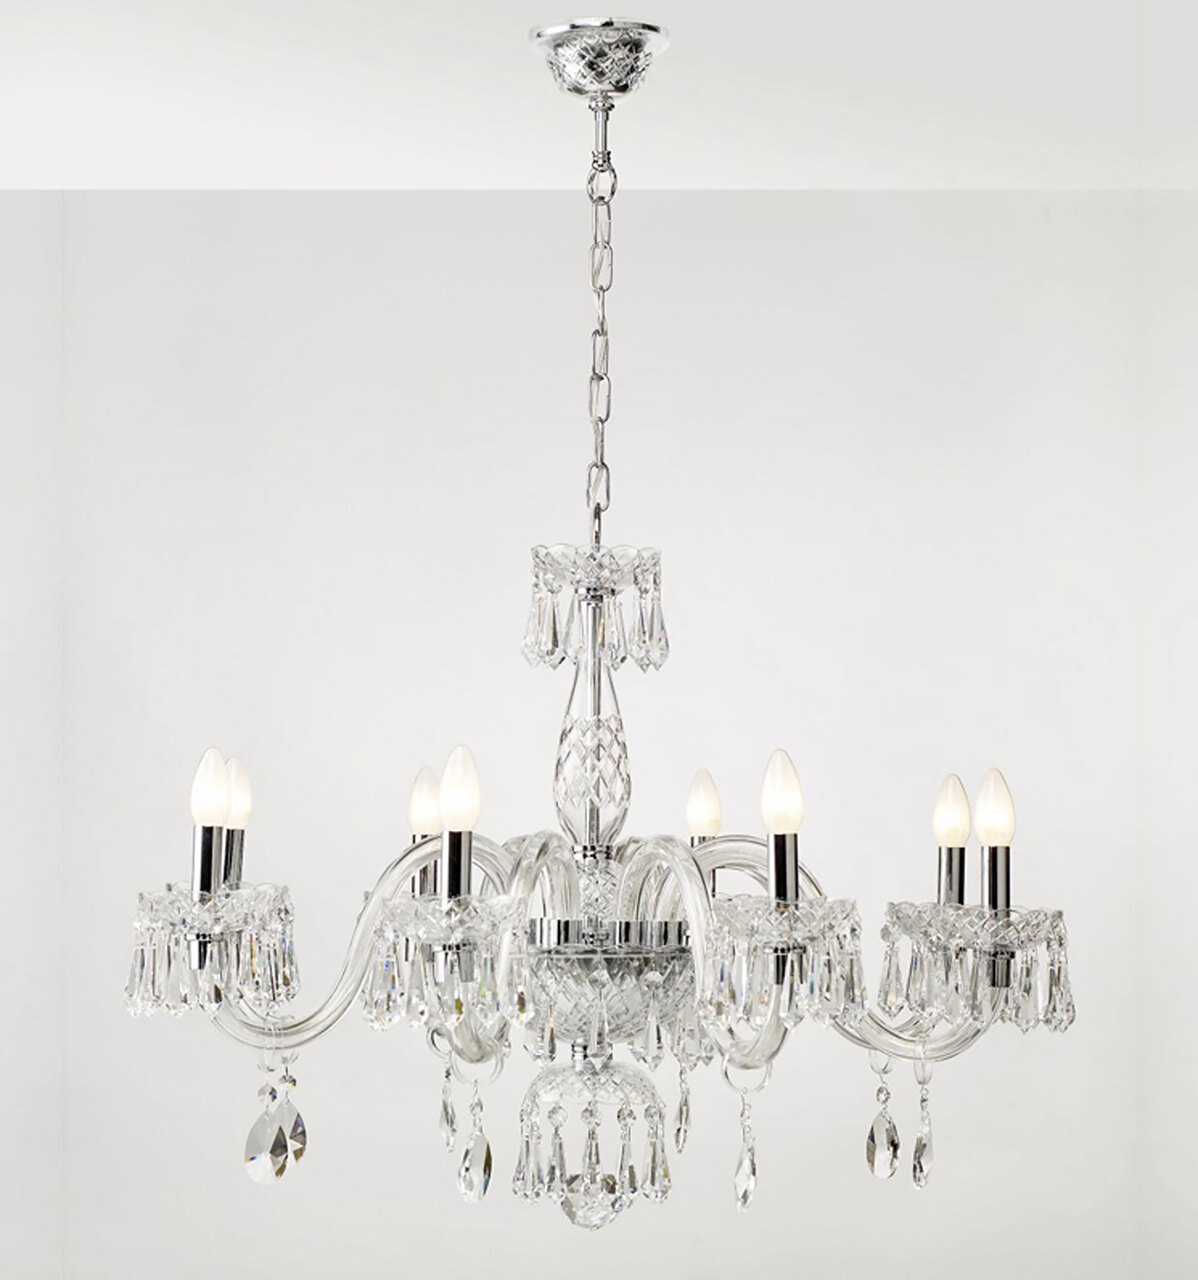 Vista Alegre Diamond Chandelier With 1 Level And 8 Arms 48000368